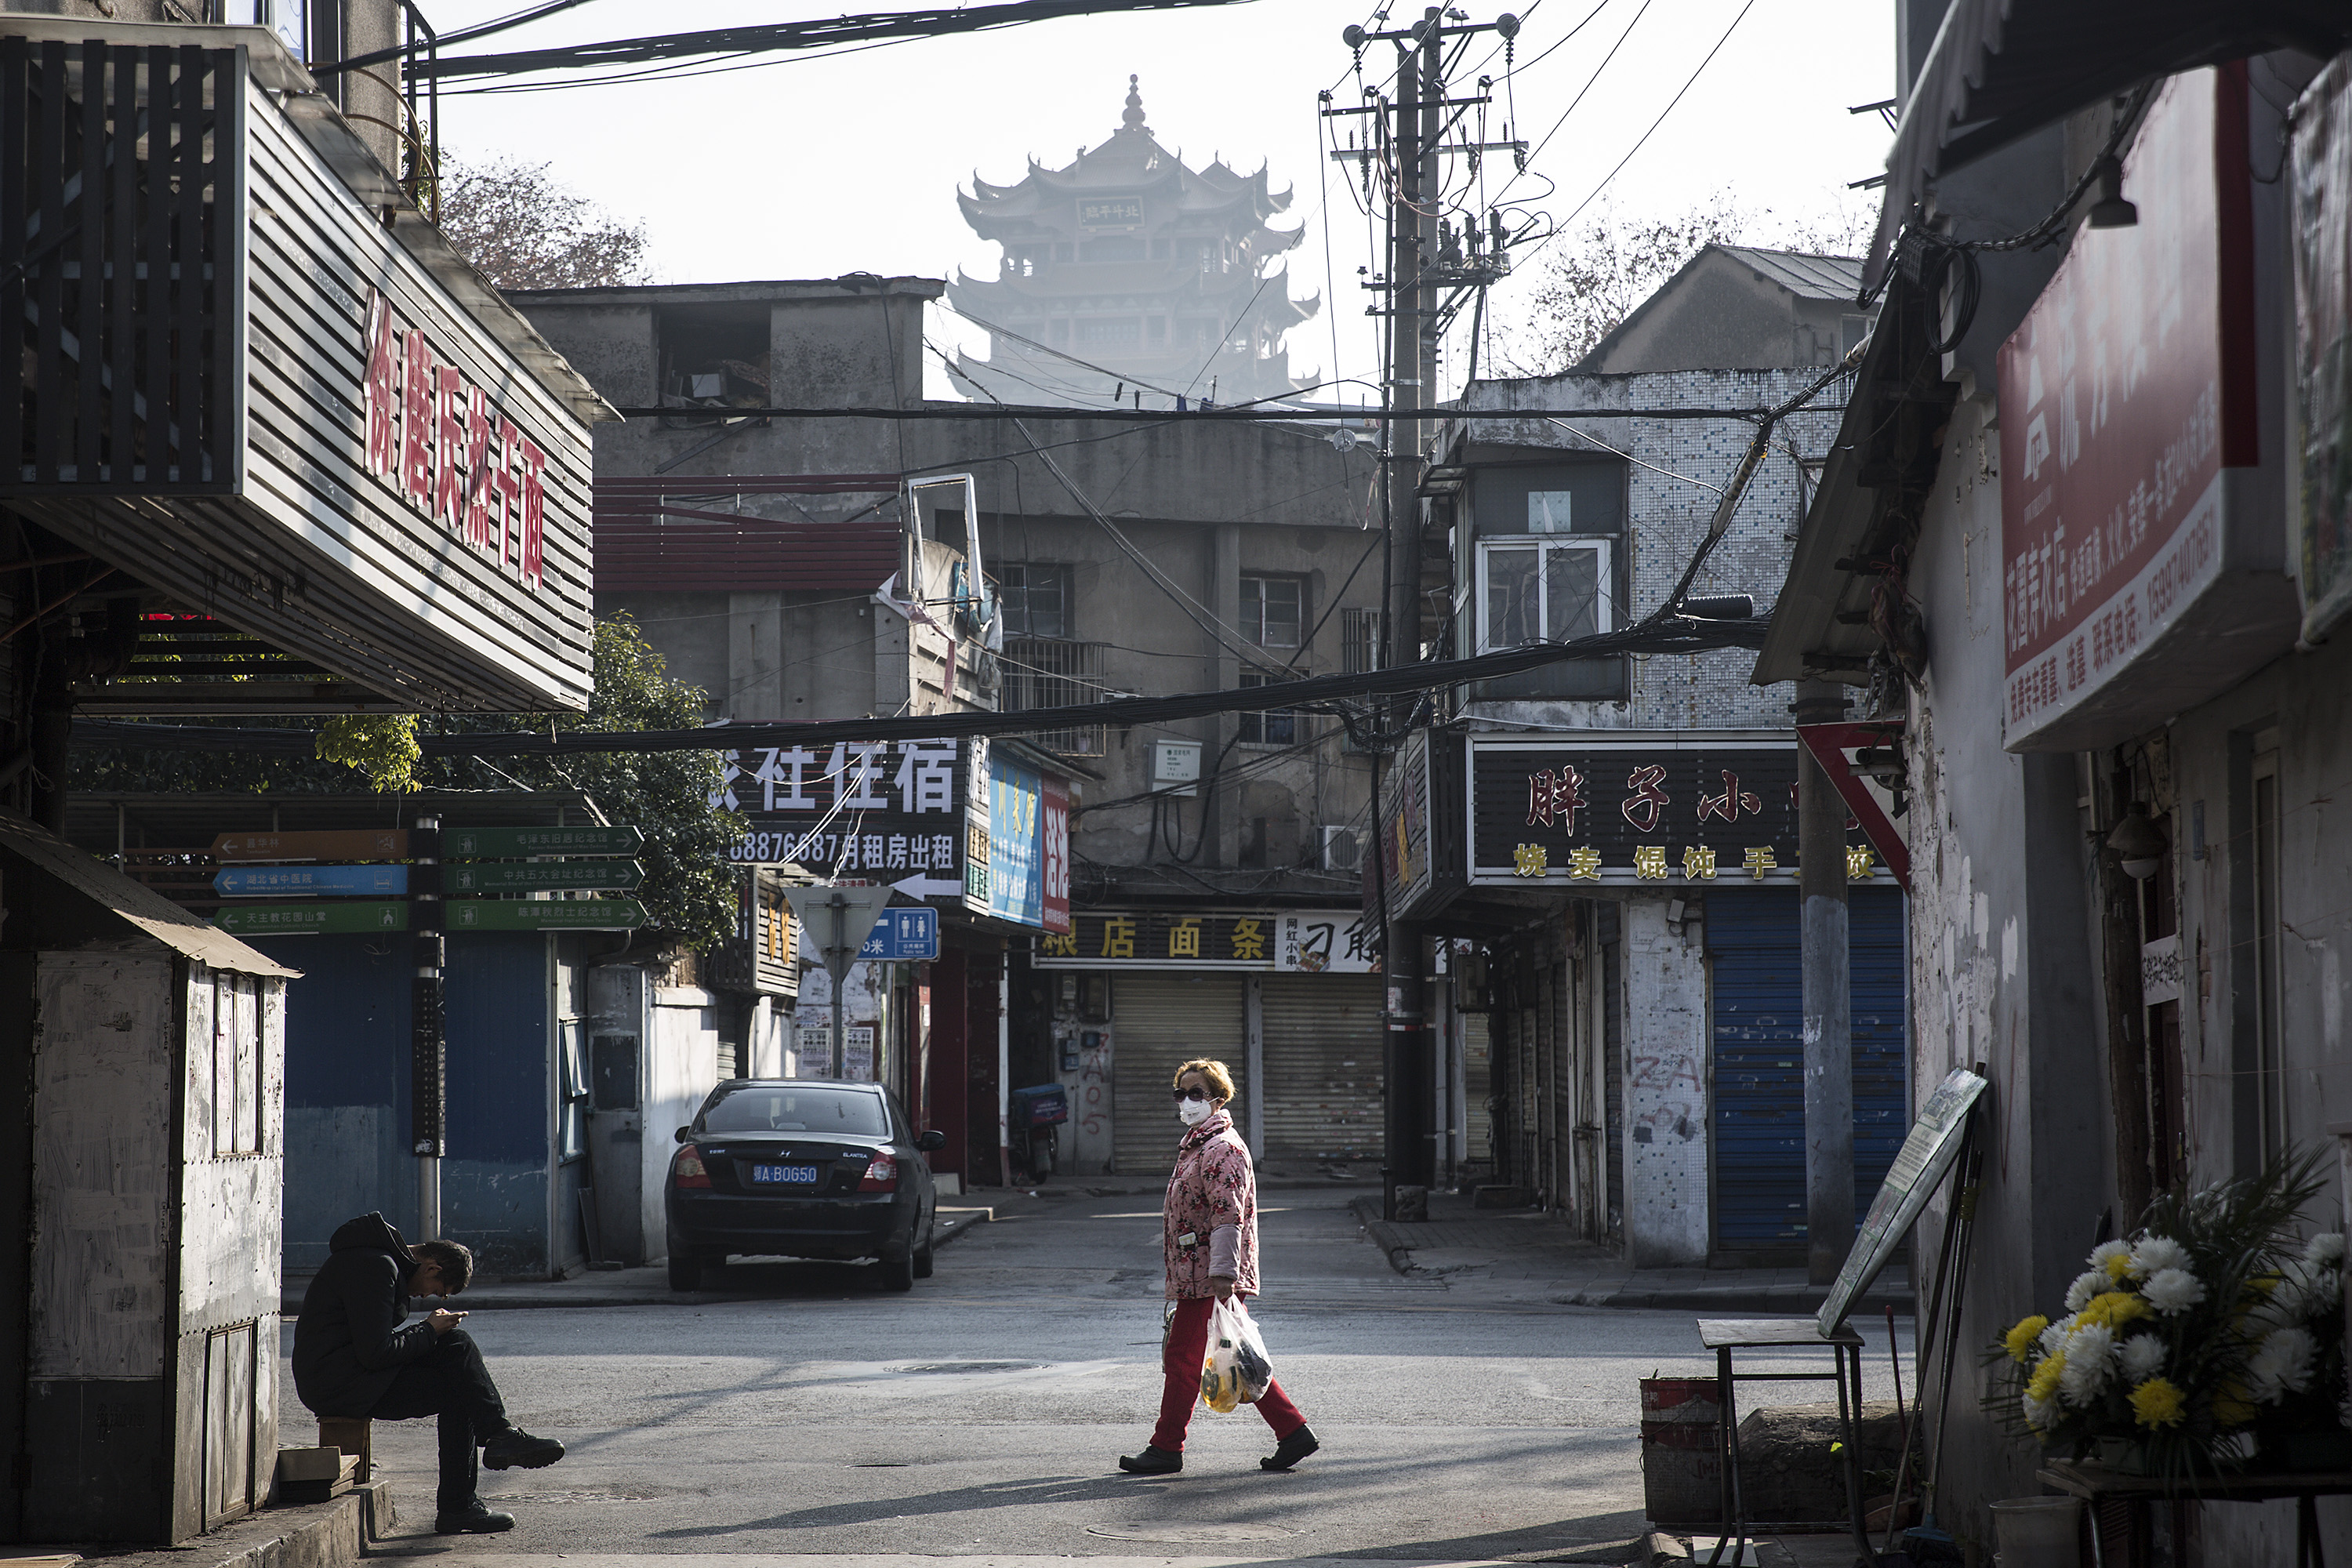  A woman wears a face mask as a man sits by the roadside on Friday in Wuhan, China.